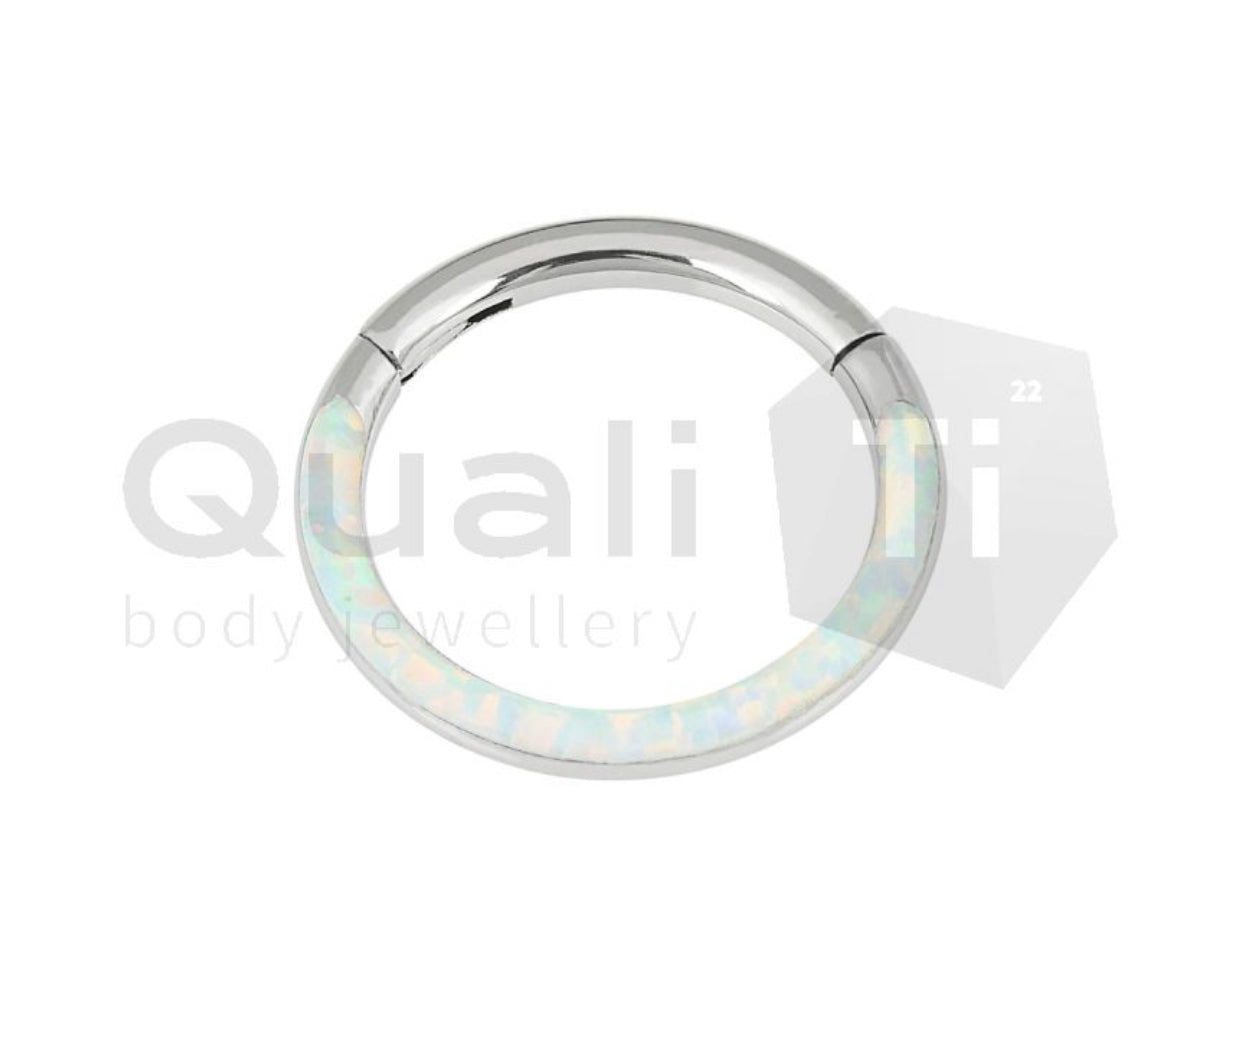 The 'Eos' White Cabochon Opal Hinged Titanium Ring